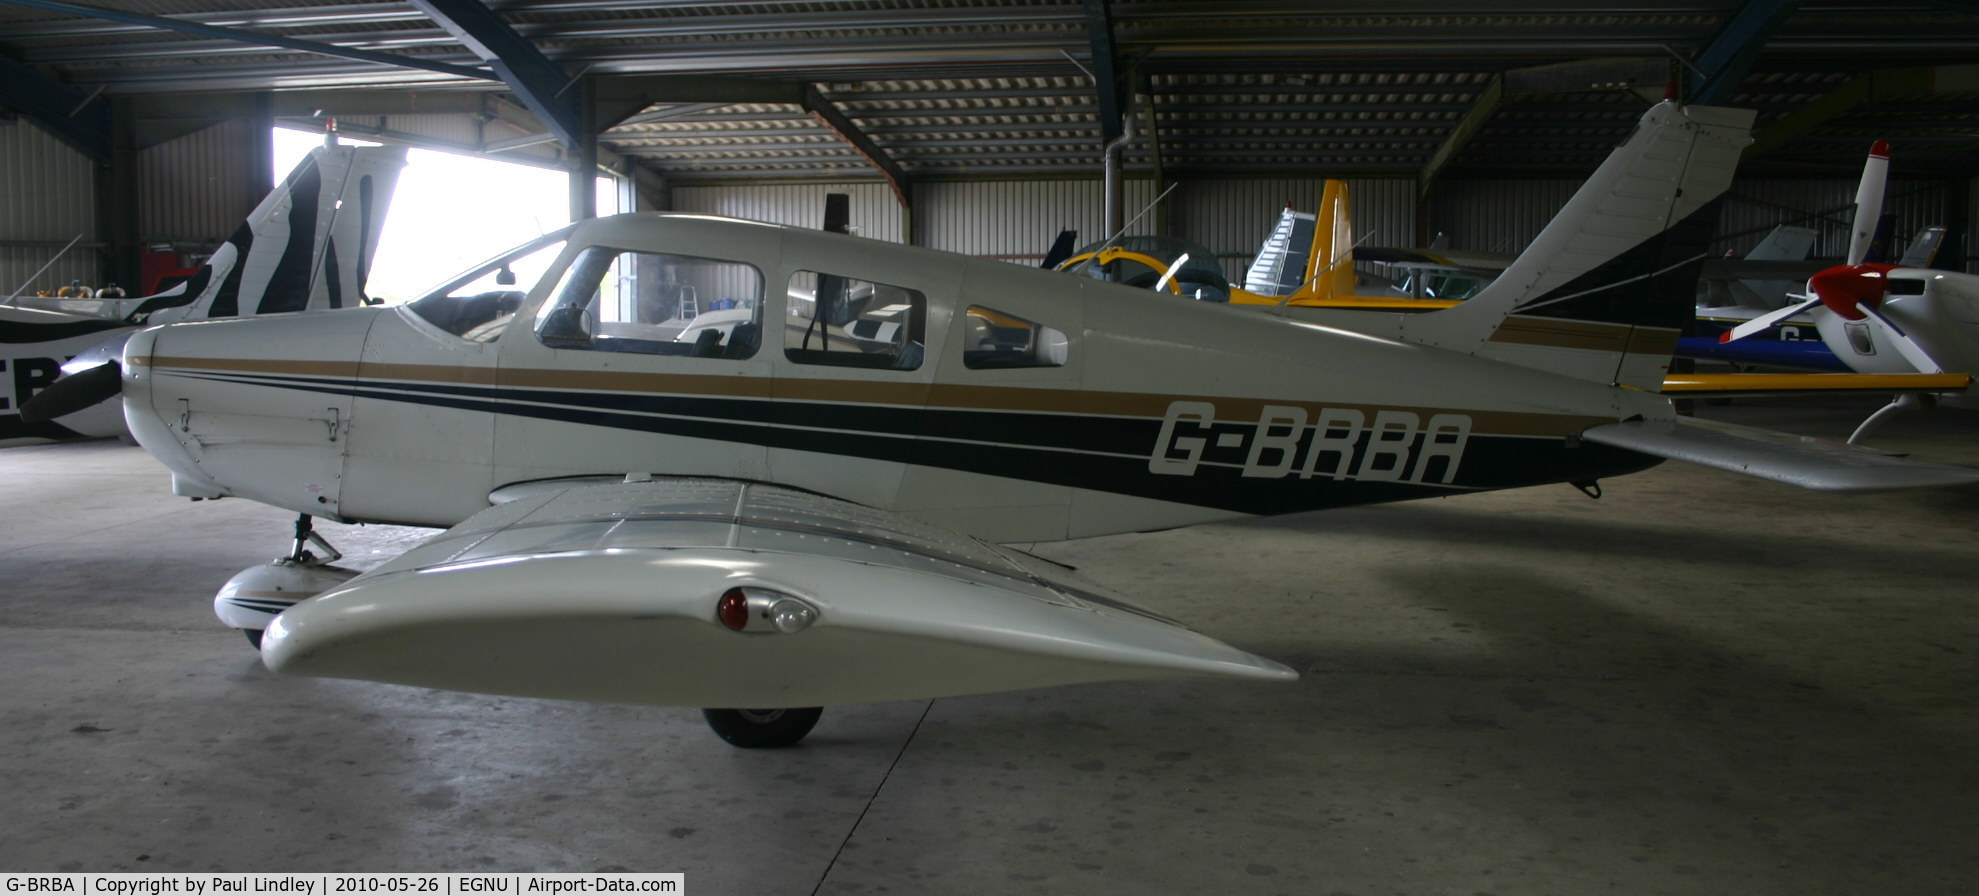 G-BRBA, 1979 Piper PA-28-161 Cherokee Warrior II C/N 28-7916109, ready for action !